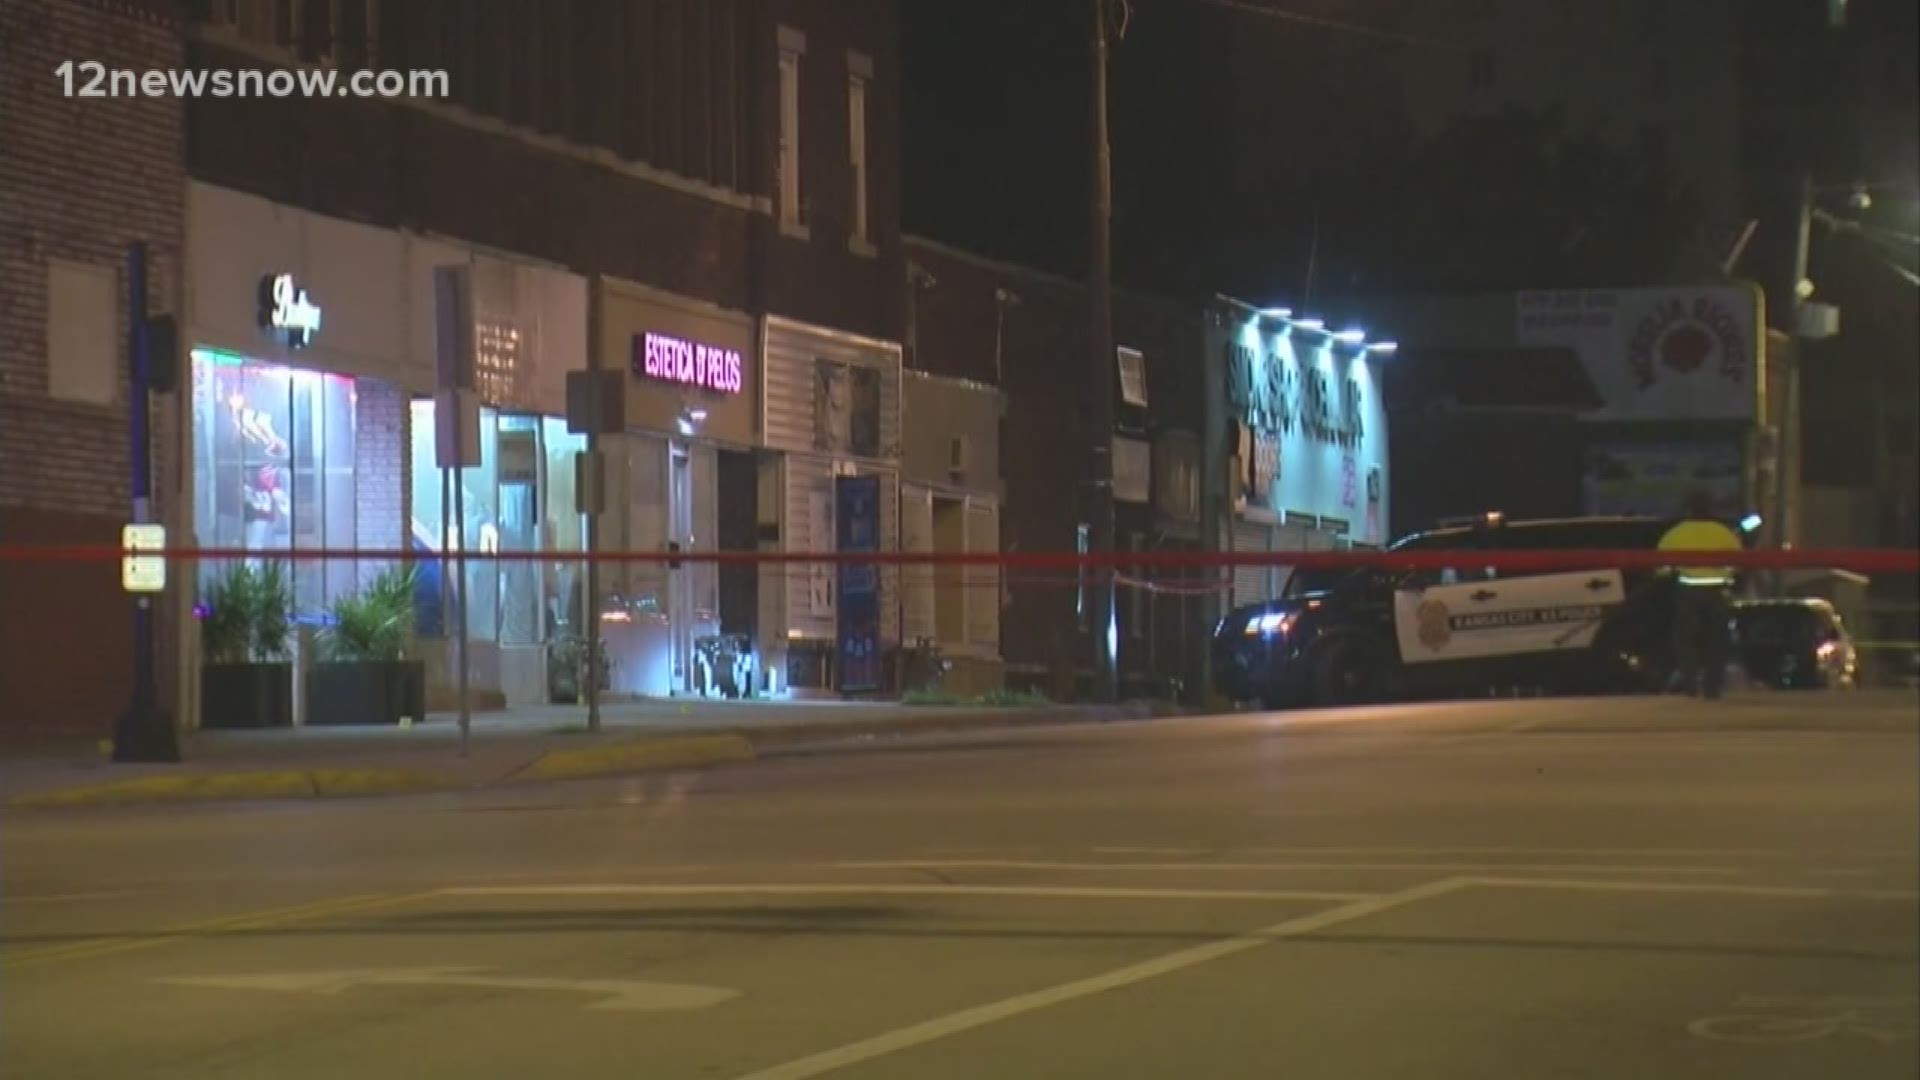 One of the two suspects involved in a Kansas City bar shooting has been arrested.